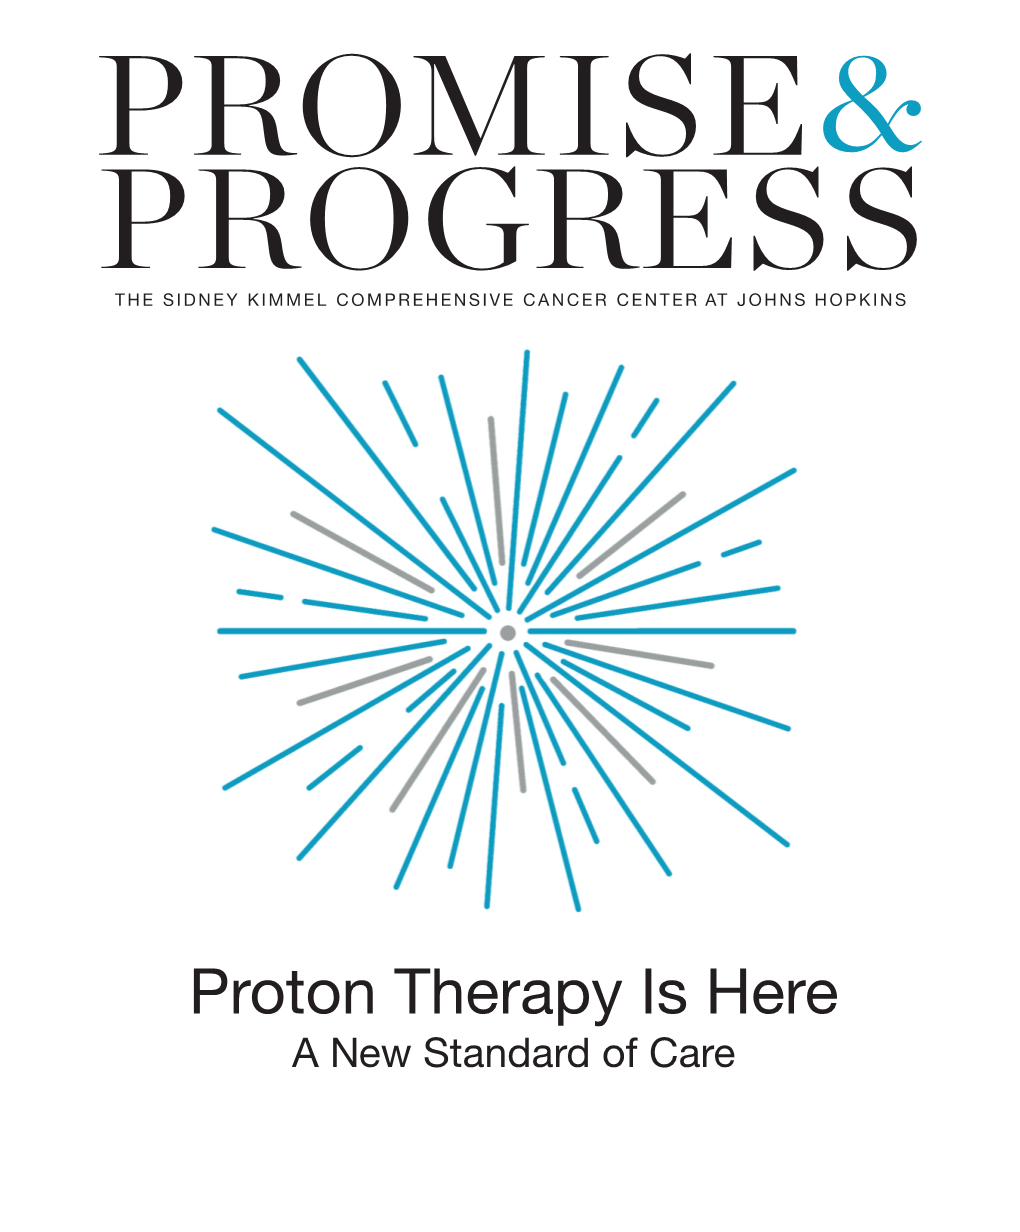 Proton Therapy Is Here a New Standard of Care